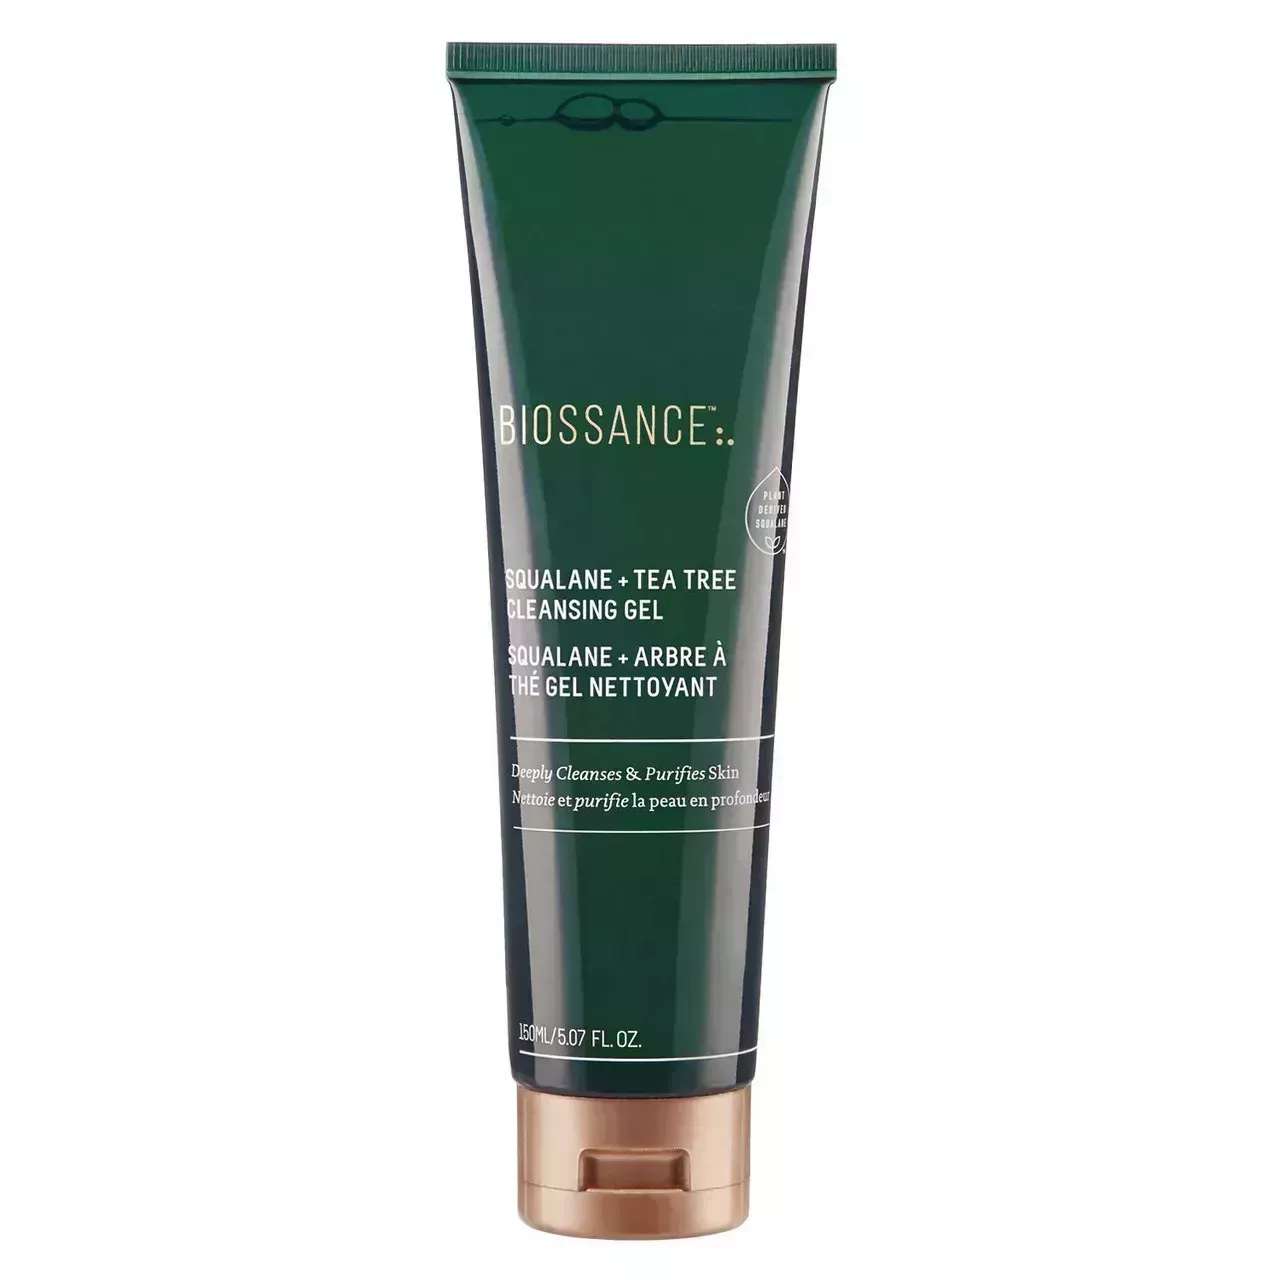 tube of Biossance Squalane Tea Tree Cleansing Gel on a white background